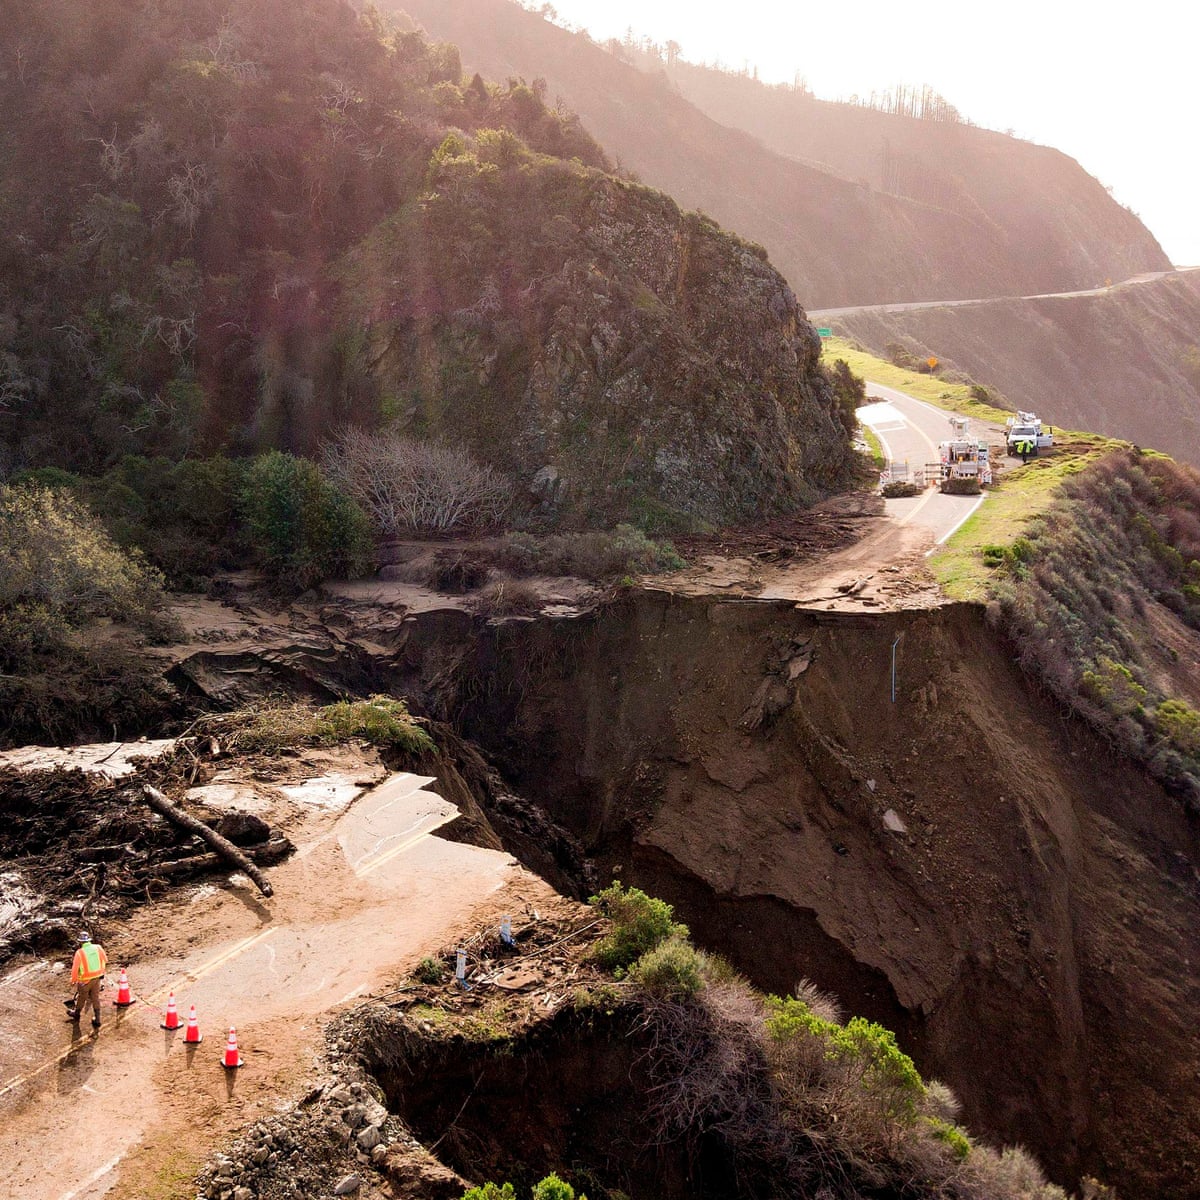 California S Famed Highway 1 Collapsed Last Week It S Sure To Happen Again California The Guardian